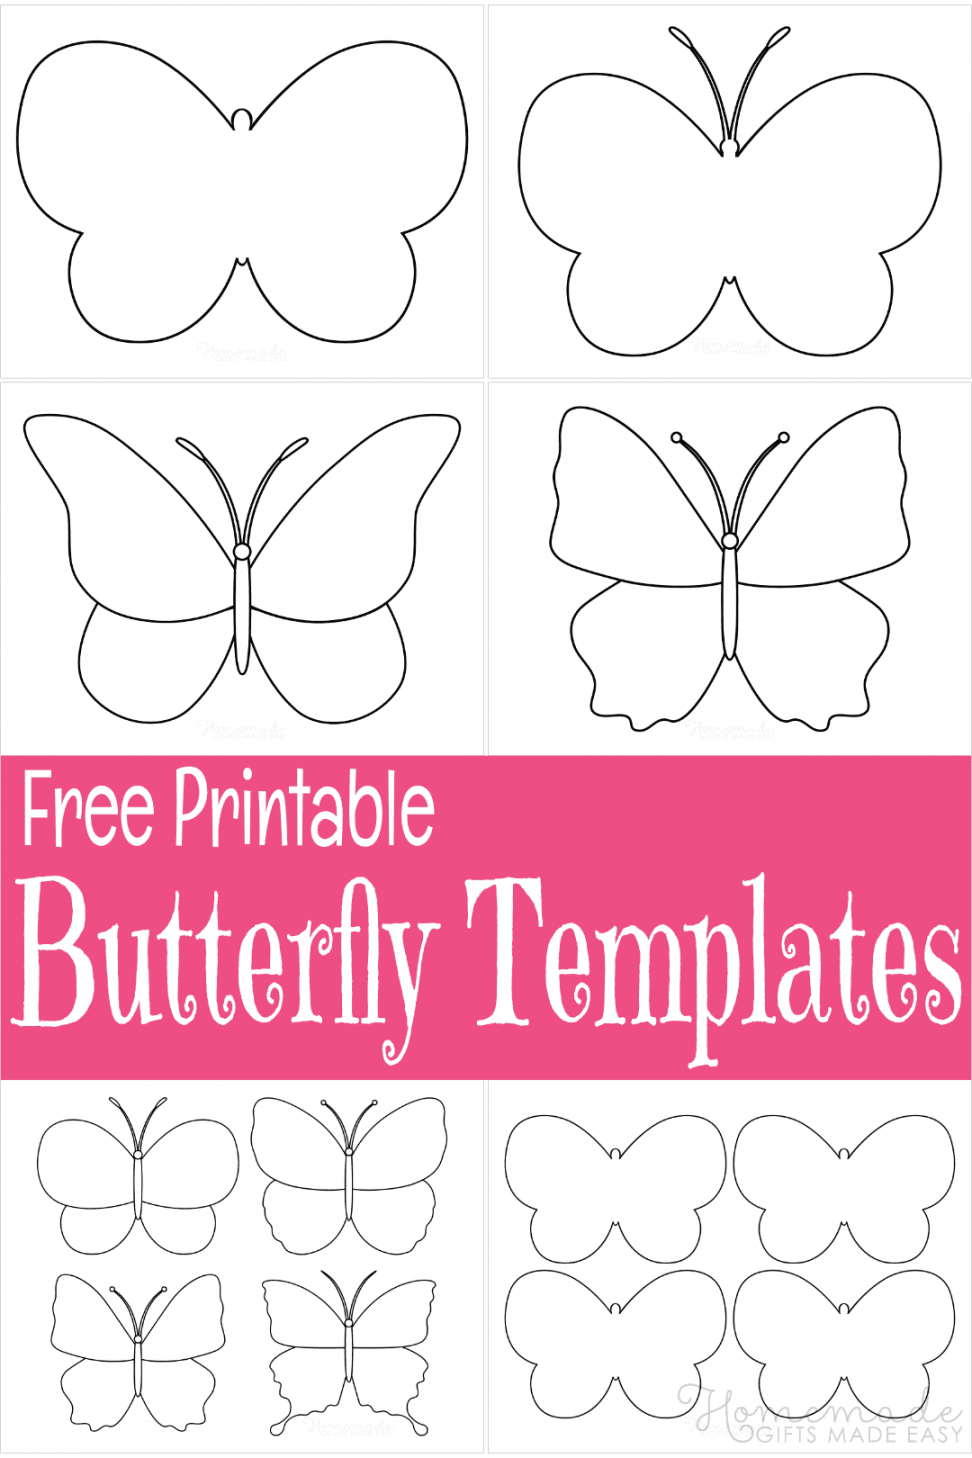 Free Printable Butterfly Templates - FREE Printables - Free Printable Butterfly Template